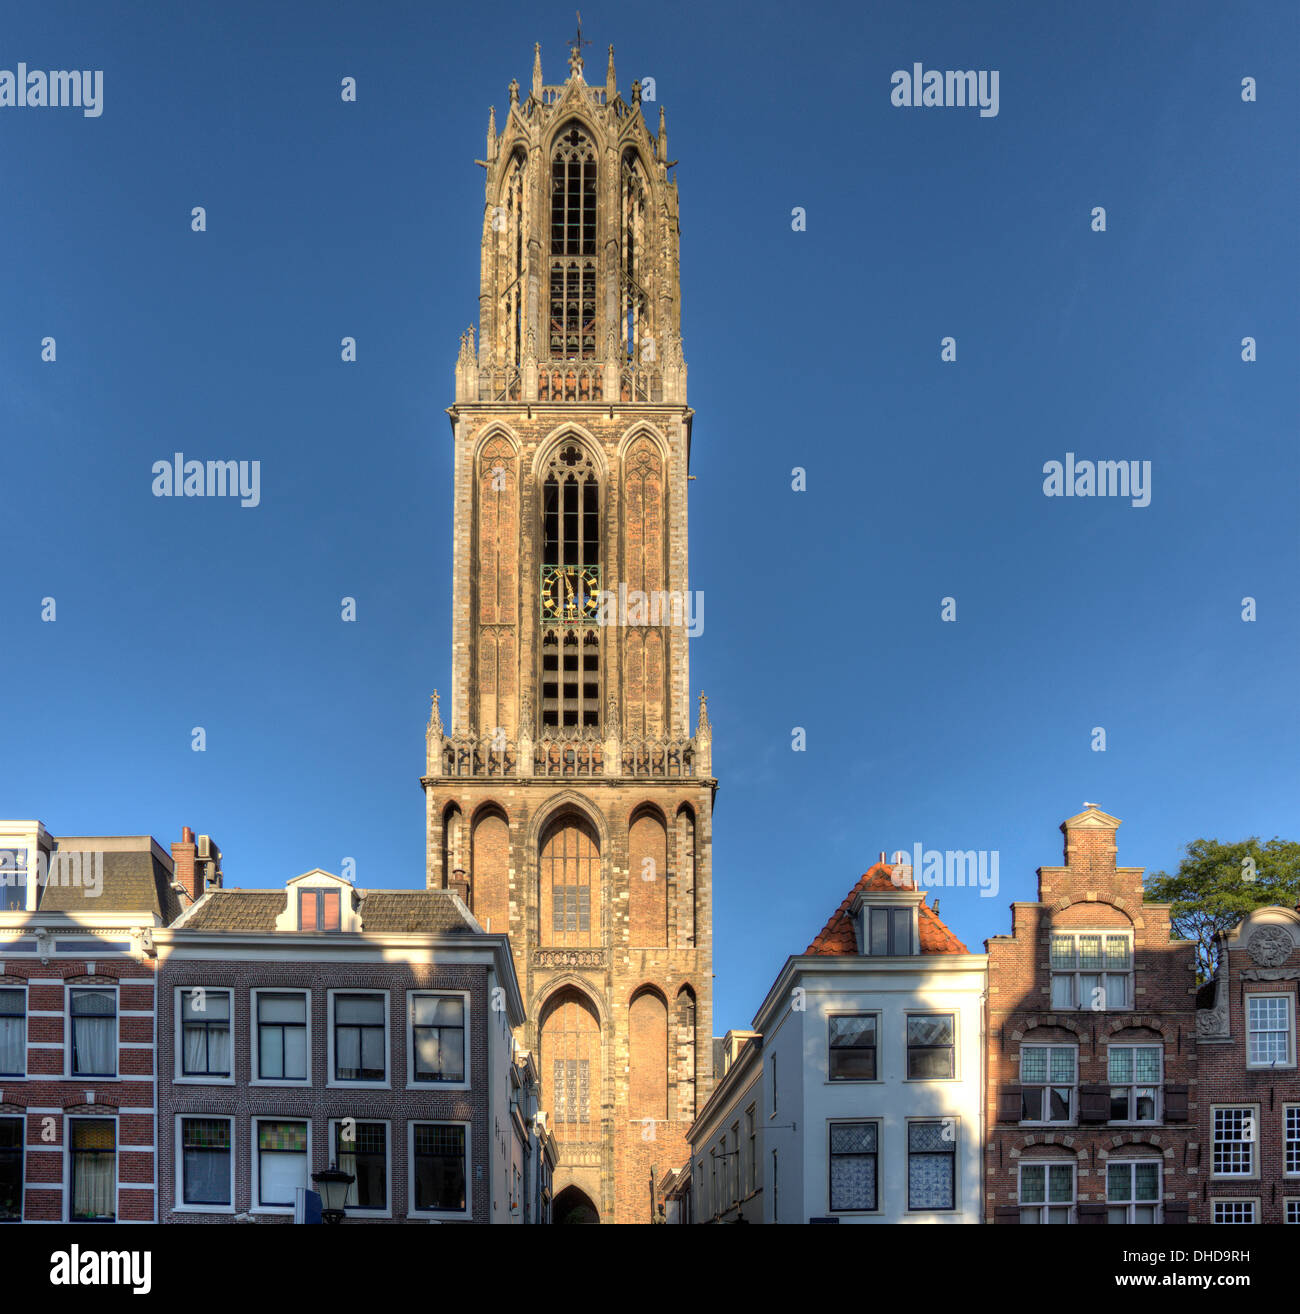 The famous Dom tower in Utrecht, Netherlands. Stock Photo